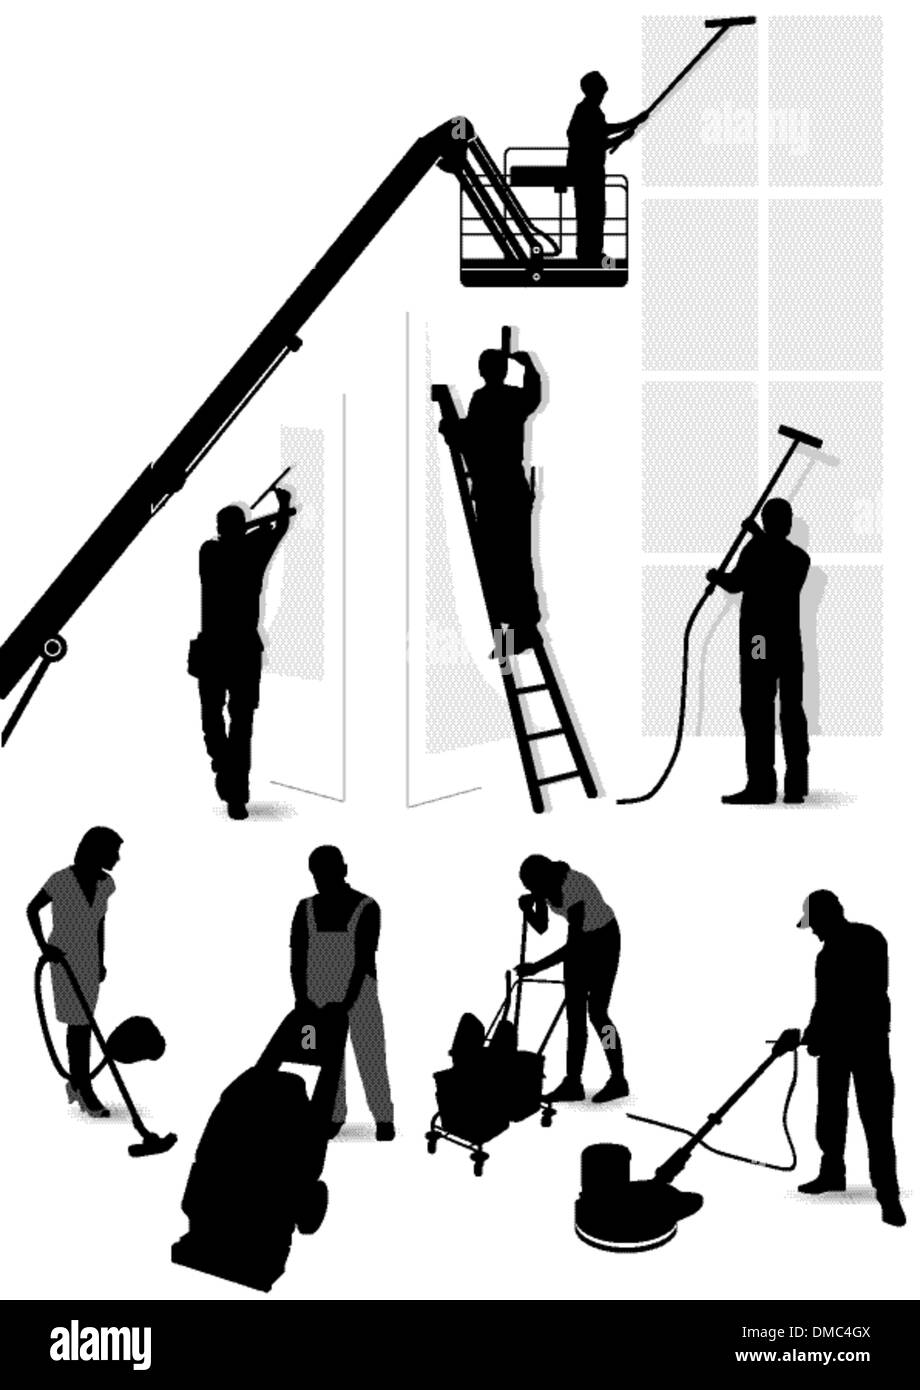 Building services and cleaning Stock Vector